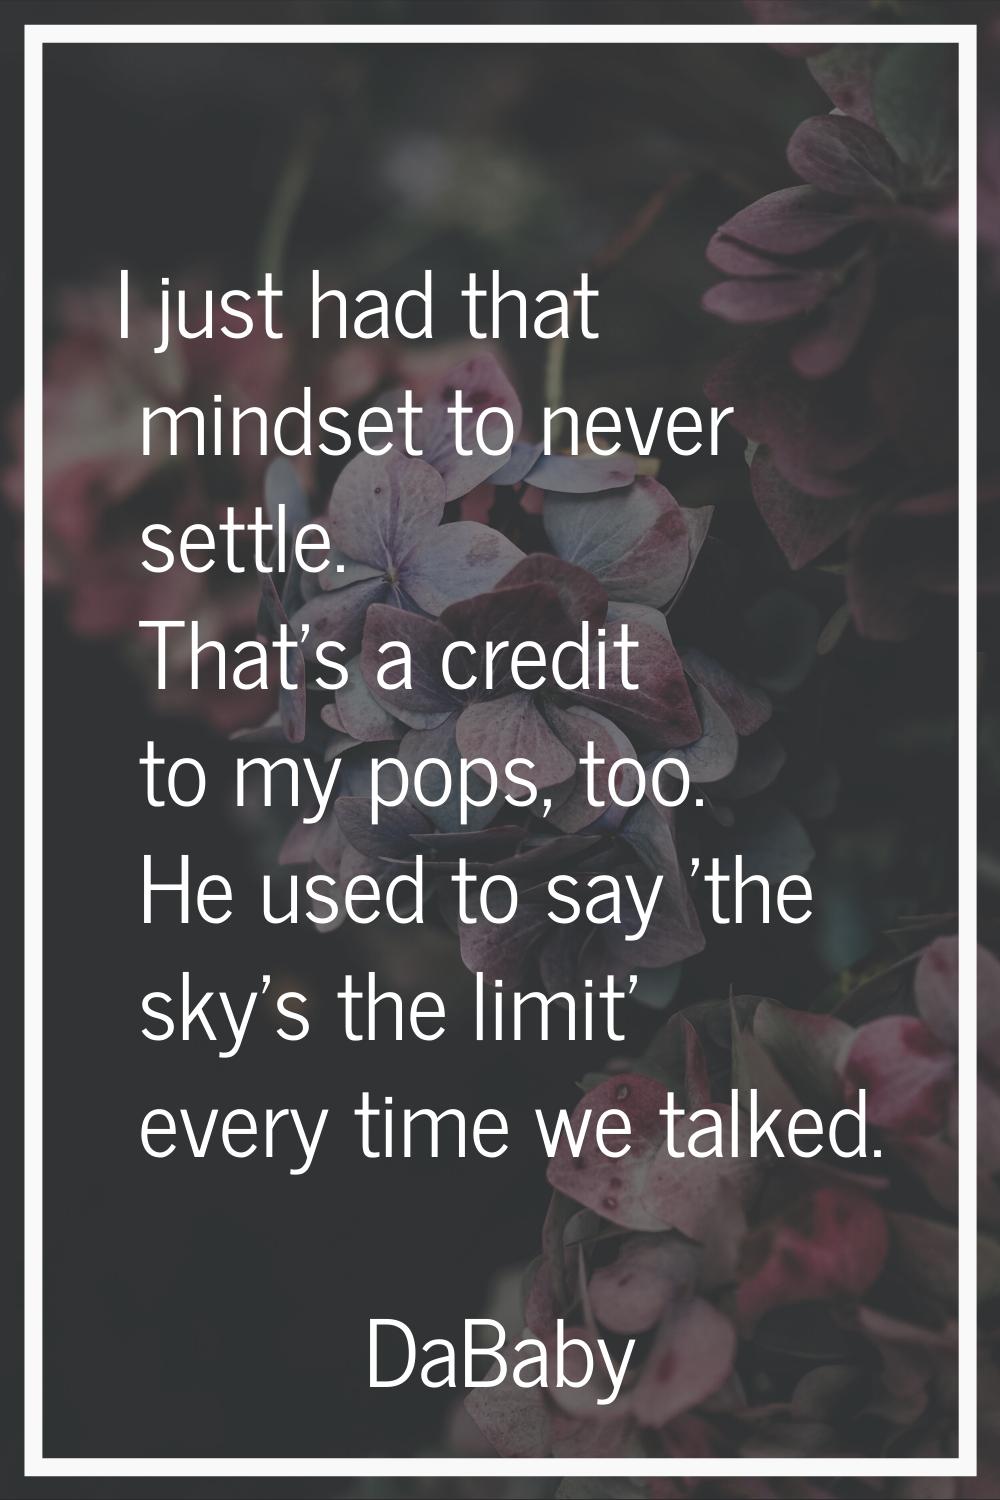 I just had that mindset to never settle. That's a credit to my pops, too. He used to say 'the sky's